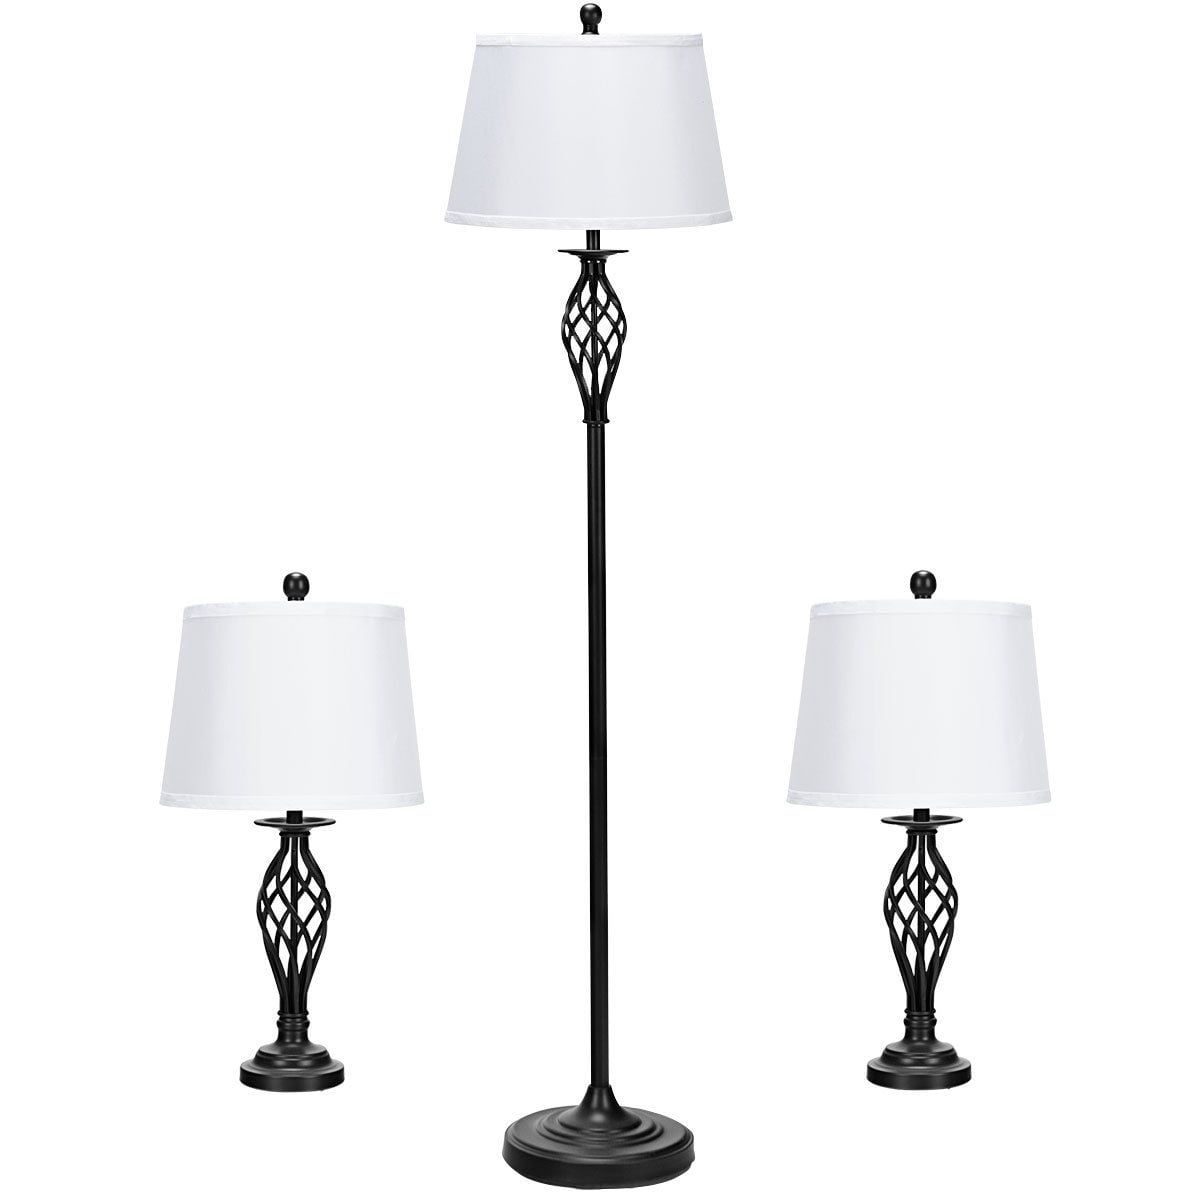 Gymax 3 Piece Lamp Set 2 Table Lamps 1 Floor Lamp Fabric Shades Living Room  Bedroom – Walmart Pertaining To 3 Piece Setfloor Lamps (View 15 of 15)